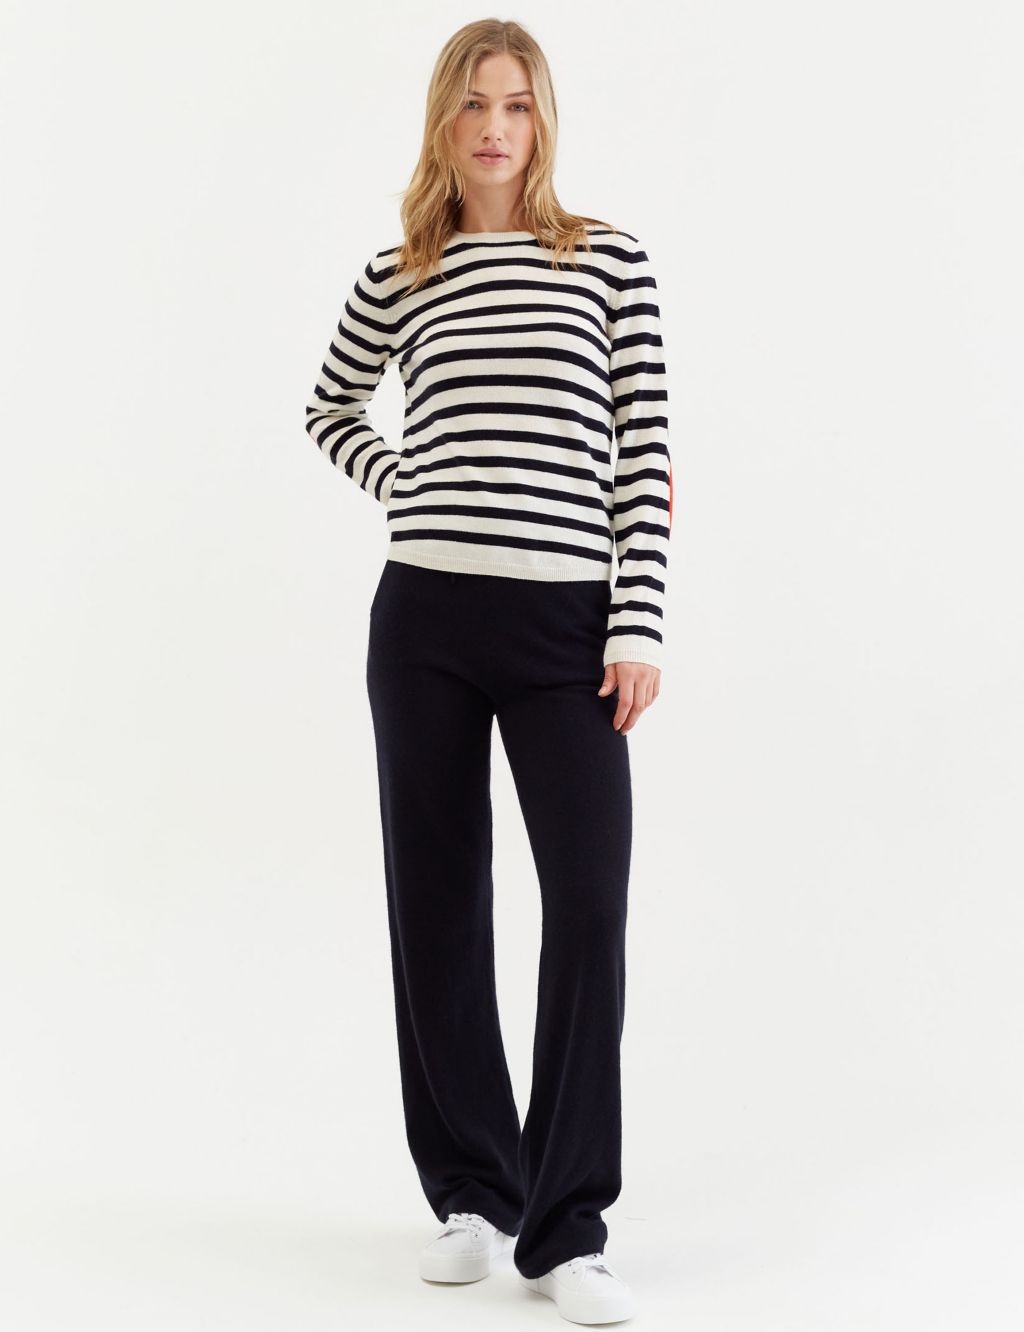 Wool Rich Striped Sweatshirt with Cashmere image 4